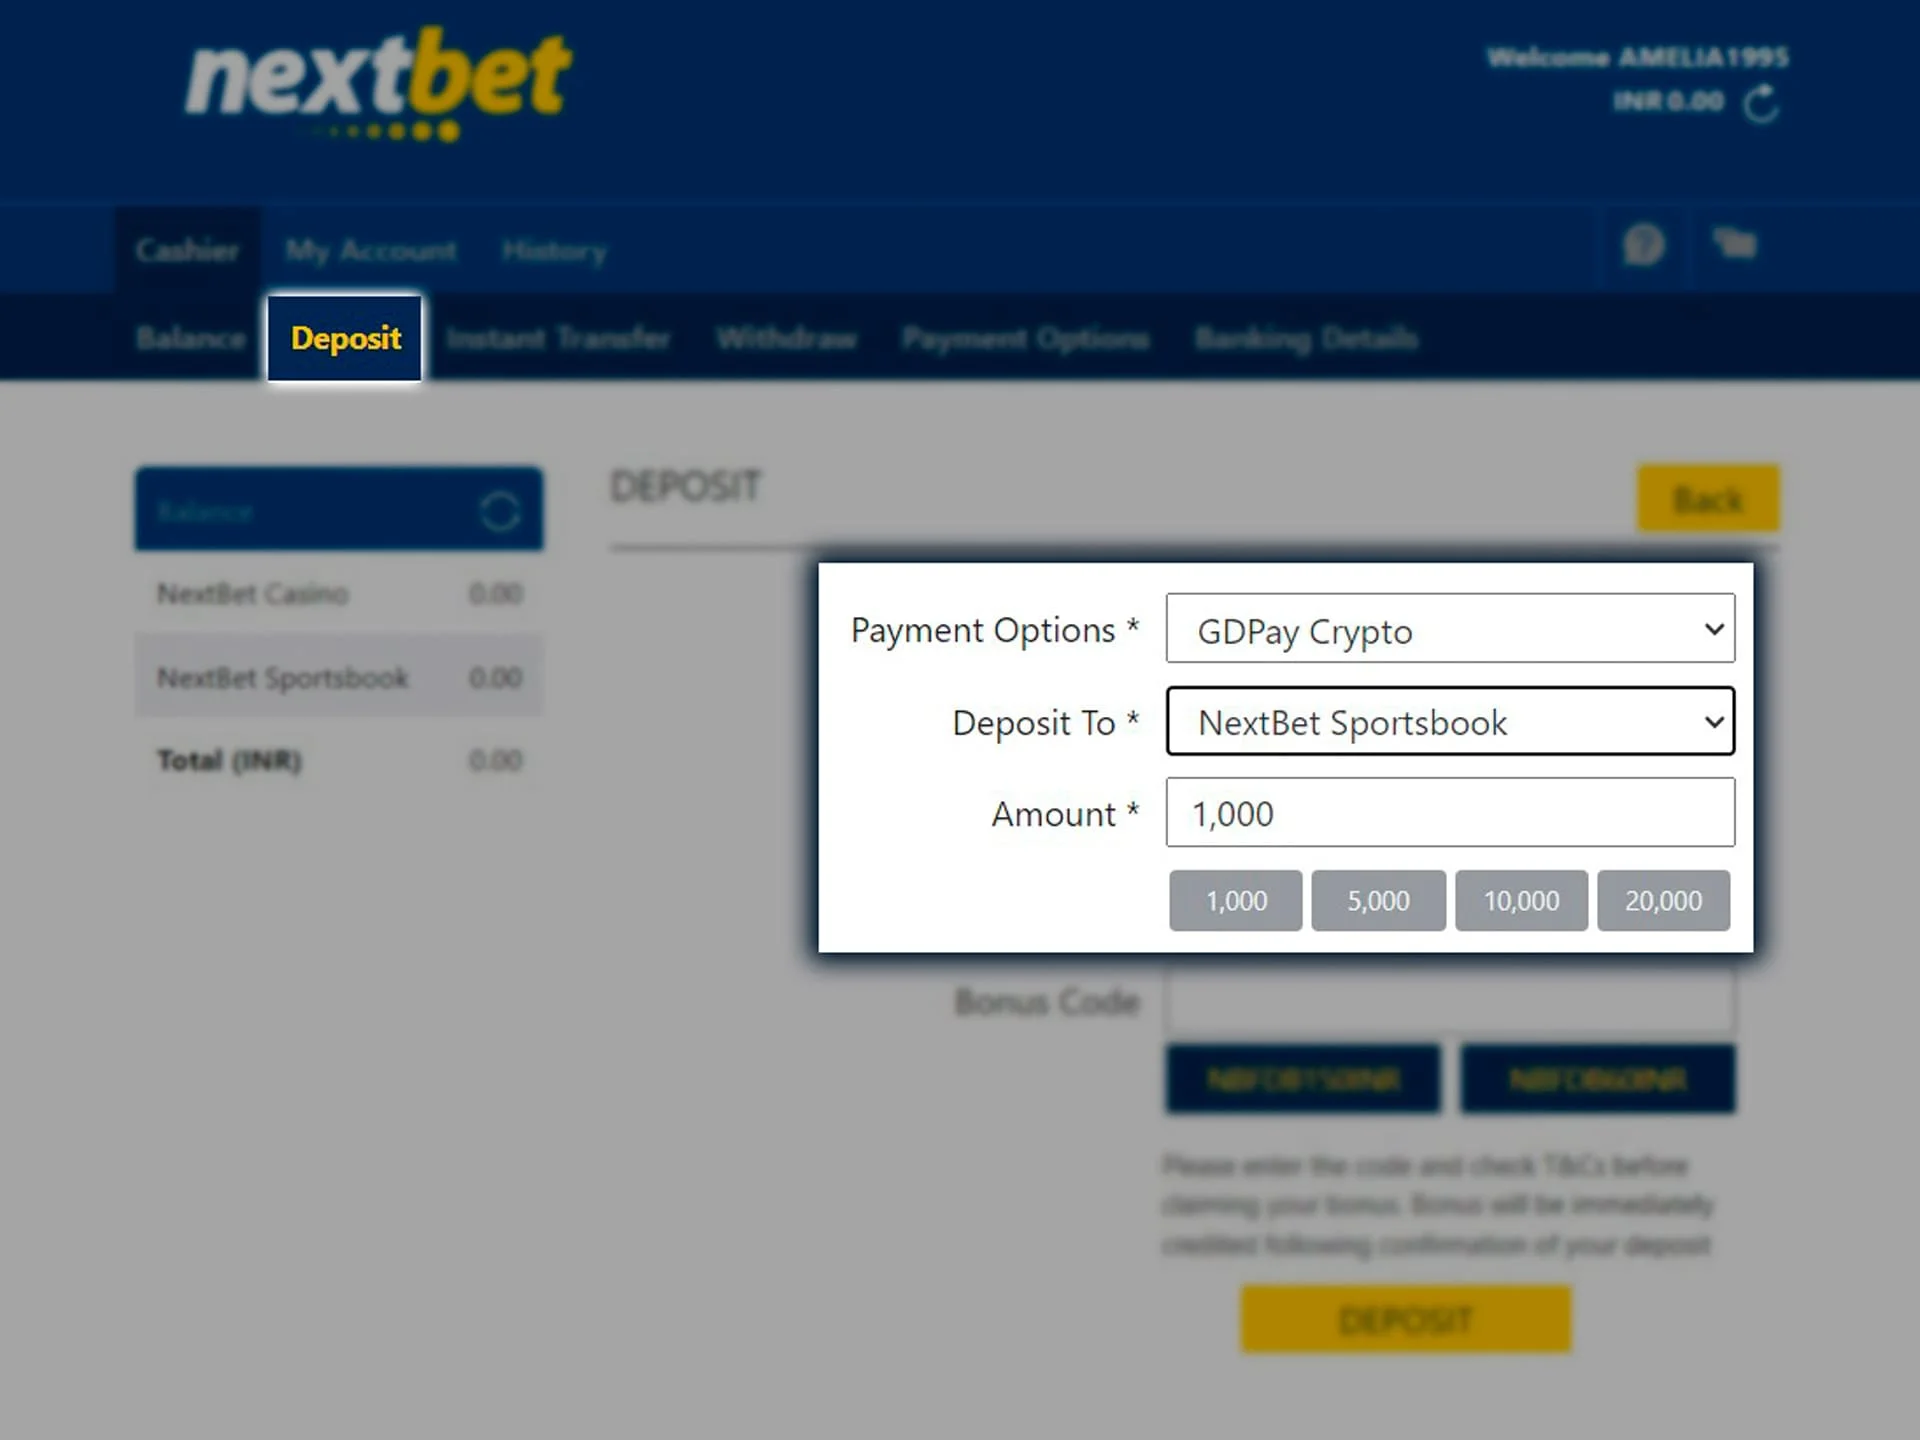 Fund your Nextbet account in the deposit section.